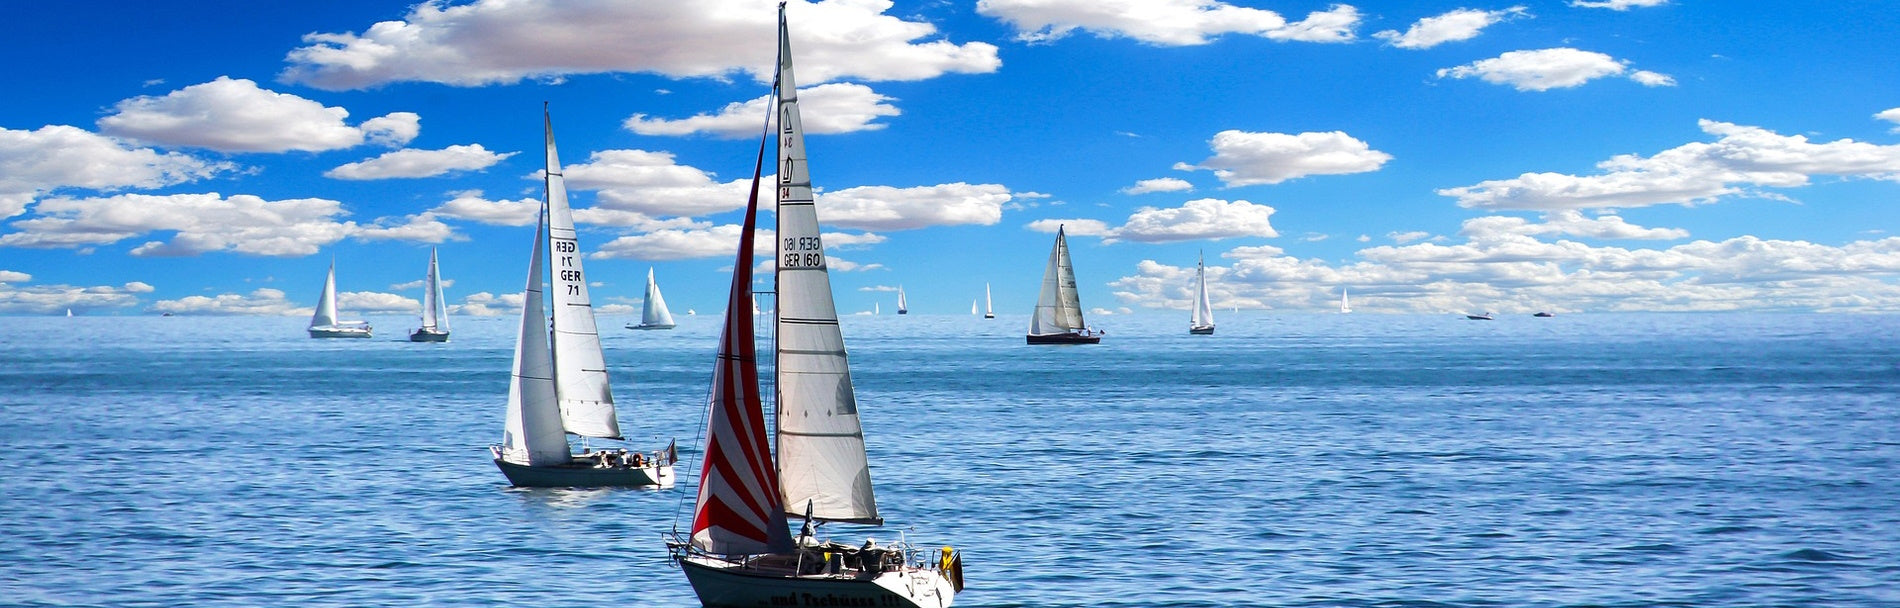 Come See ugo® At The Annapolis Sail Boat Show!